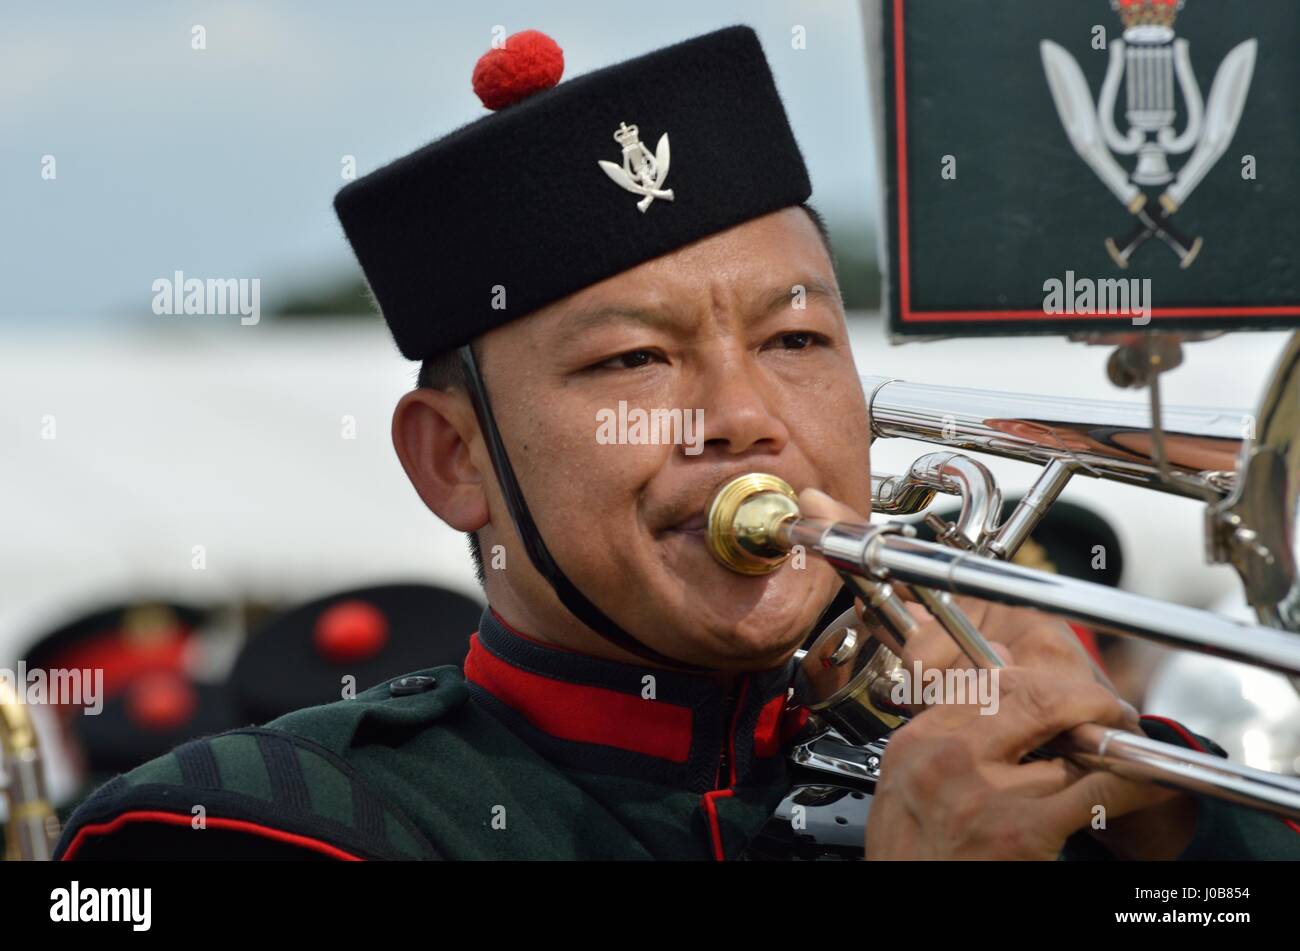 Military Tattoo  COLCHESTER ESSEX UK 8 July 2014:   Gurkha soldier blowing trumpet Stock Photo